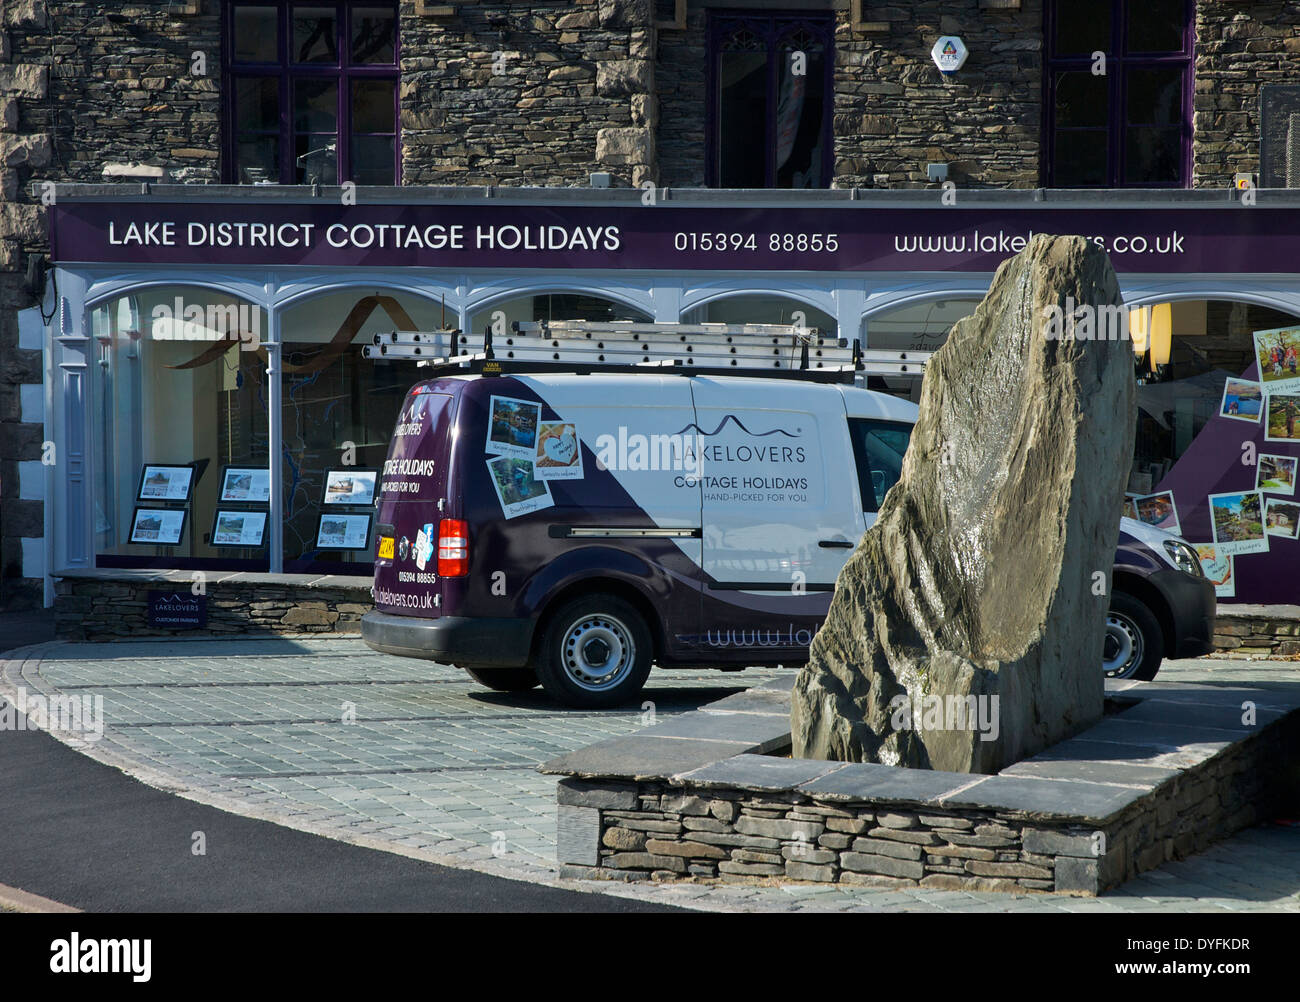 Shop Front And Van For Lake District Holiday Cottages In